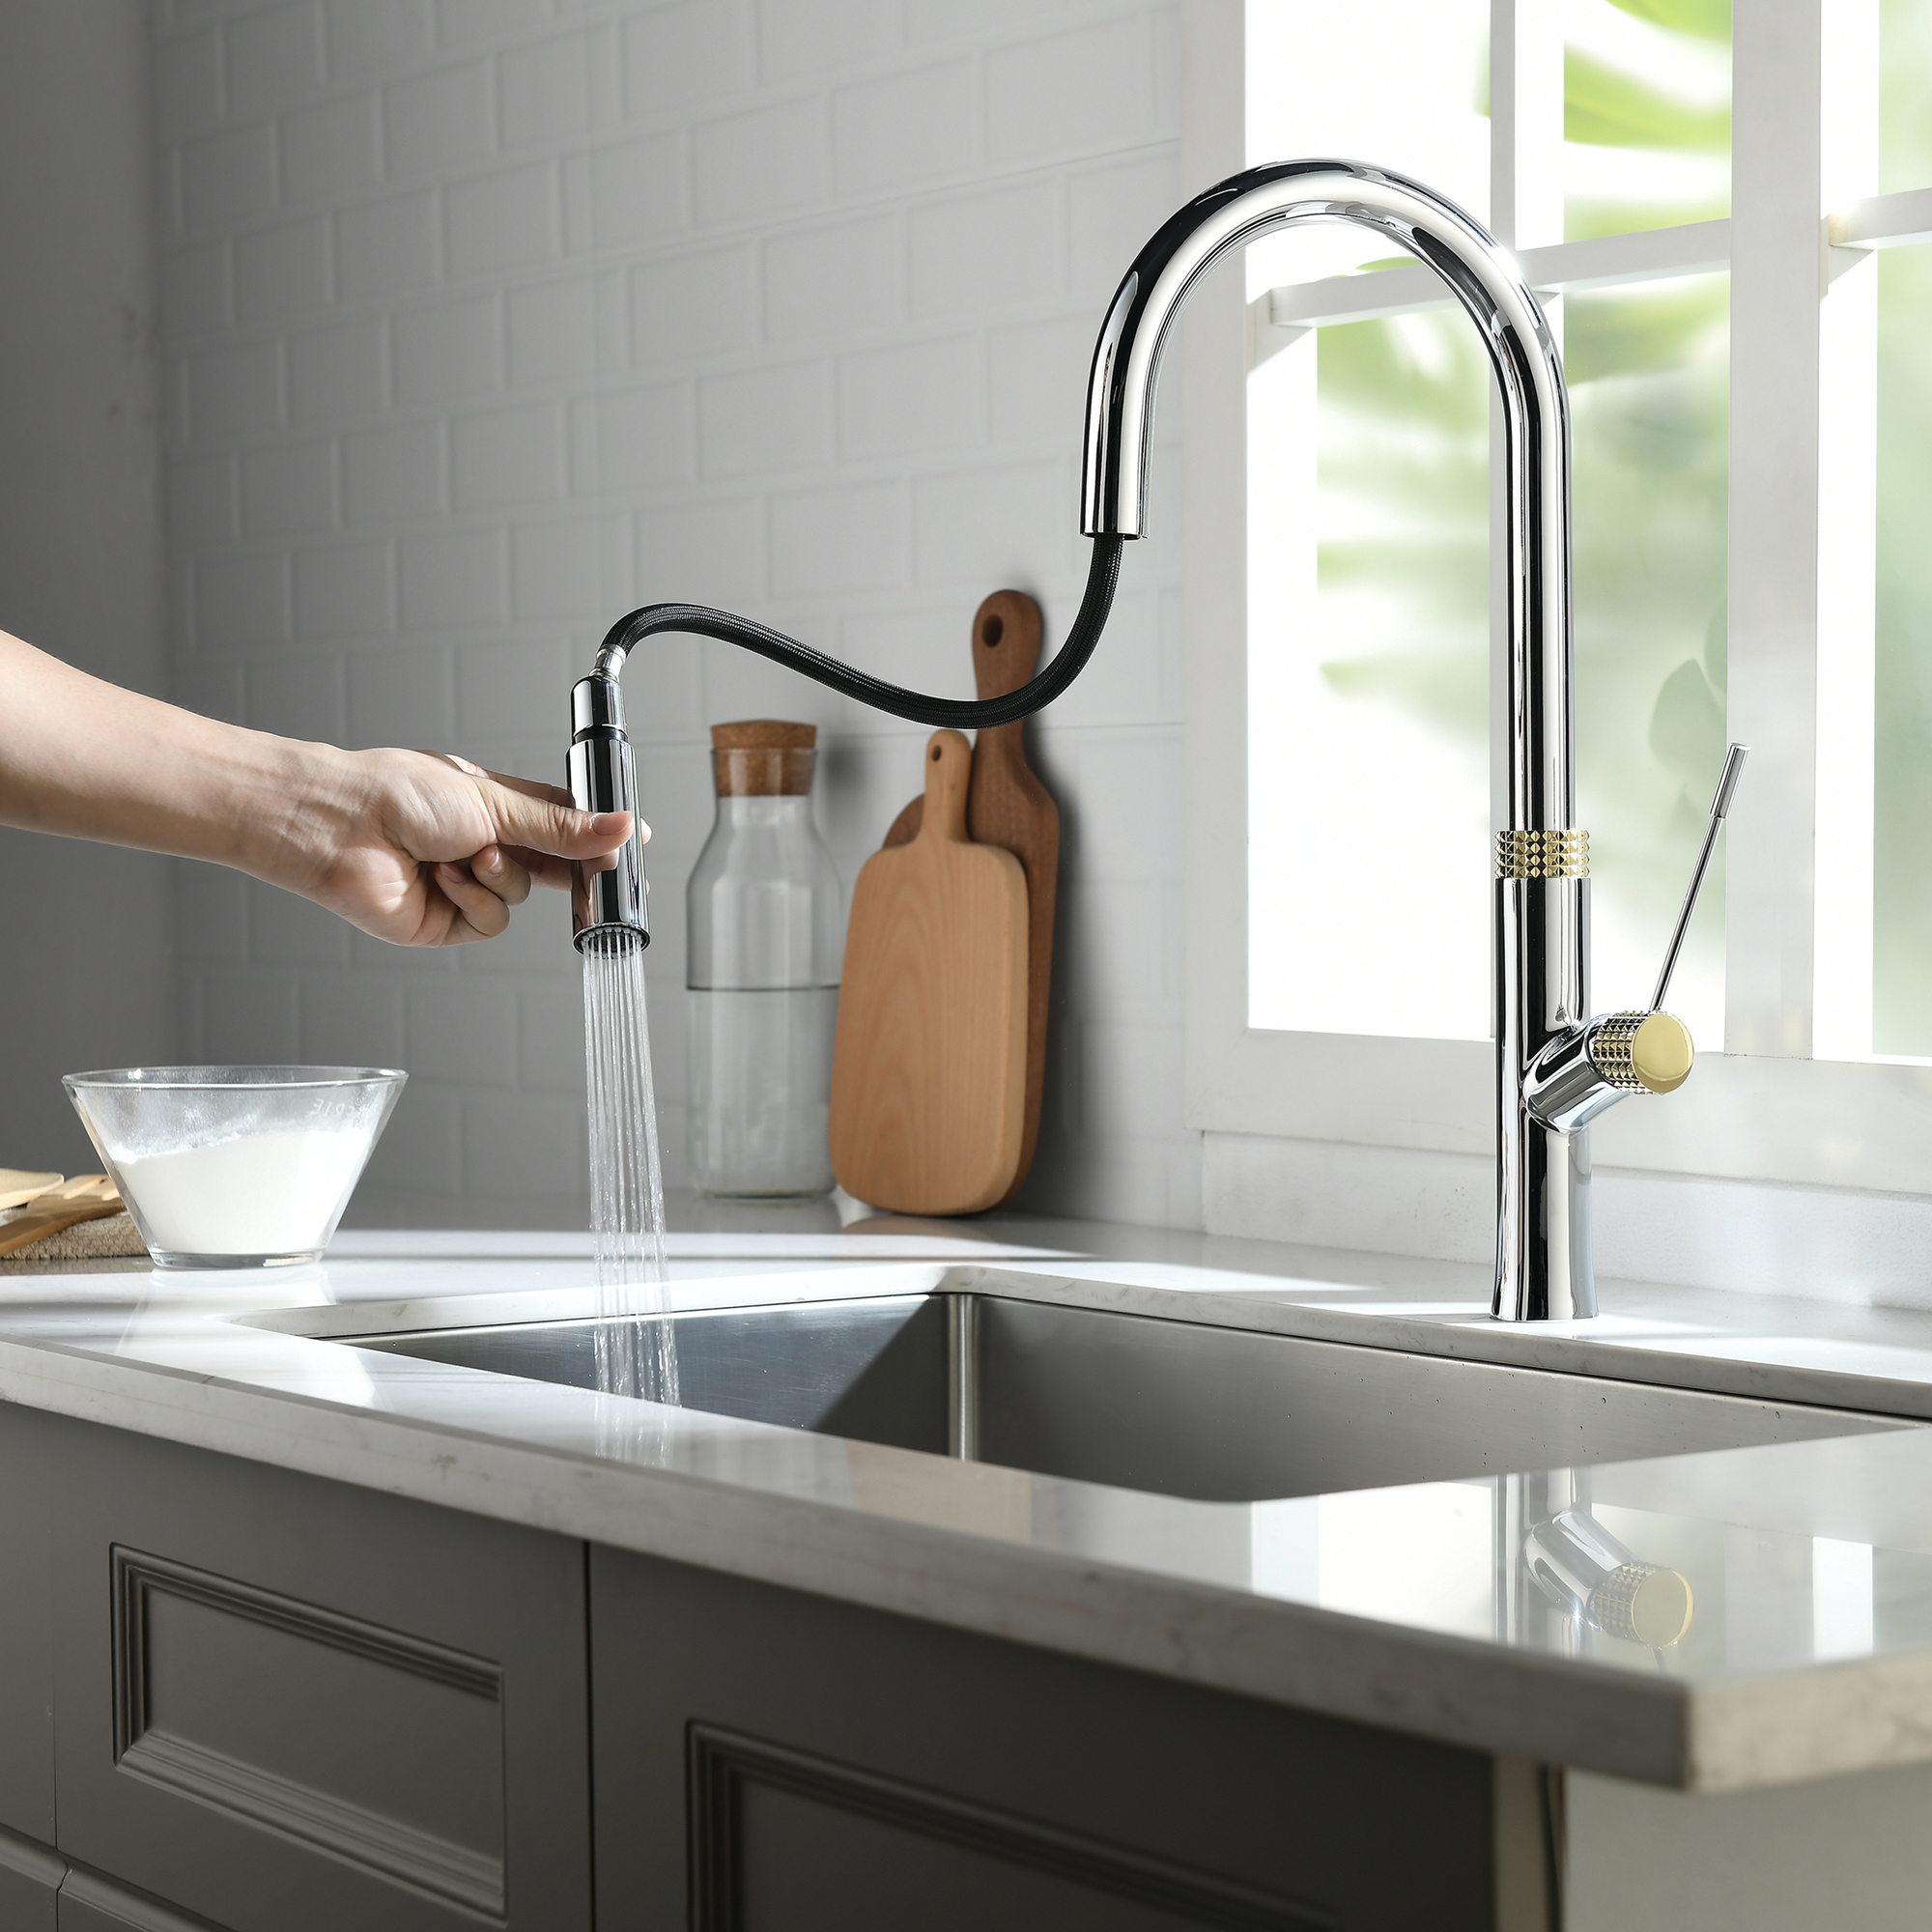 Gowo Brass Faucet Tap Kitchen Mixer With Ce Certificate